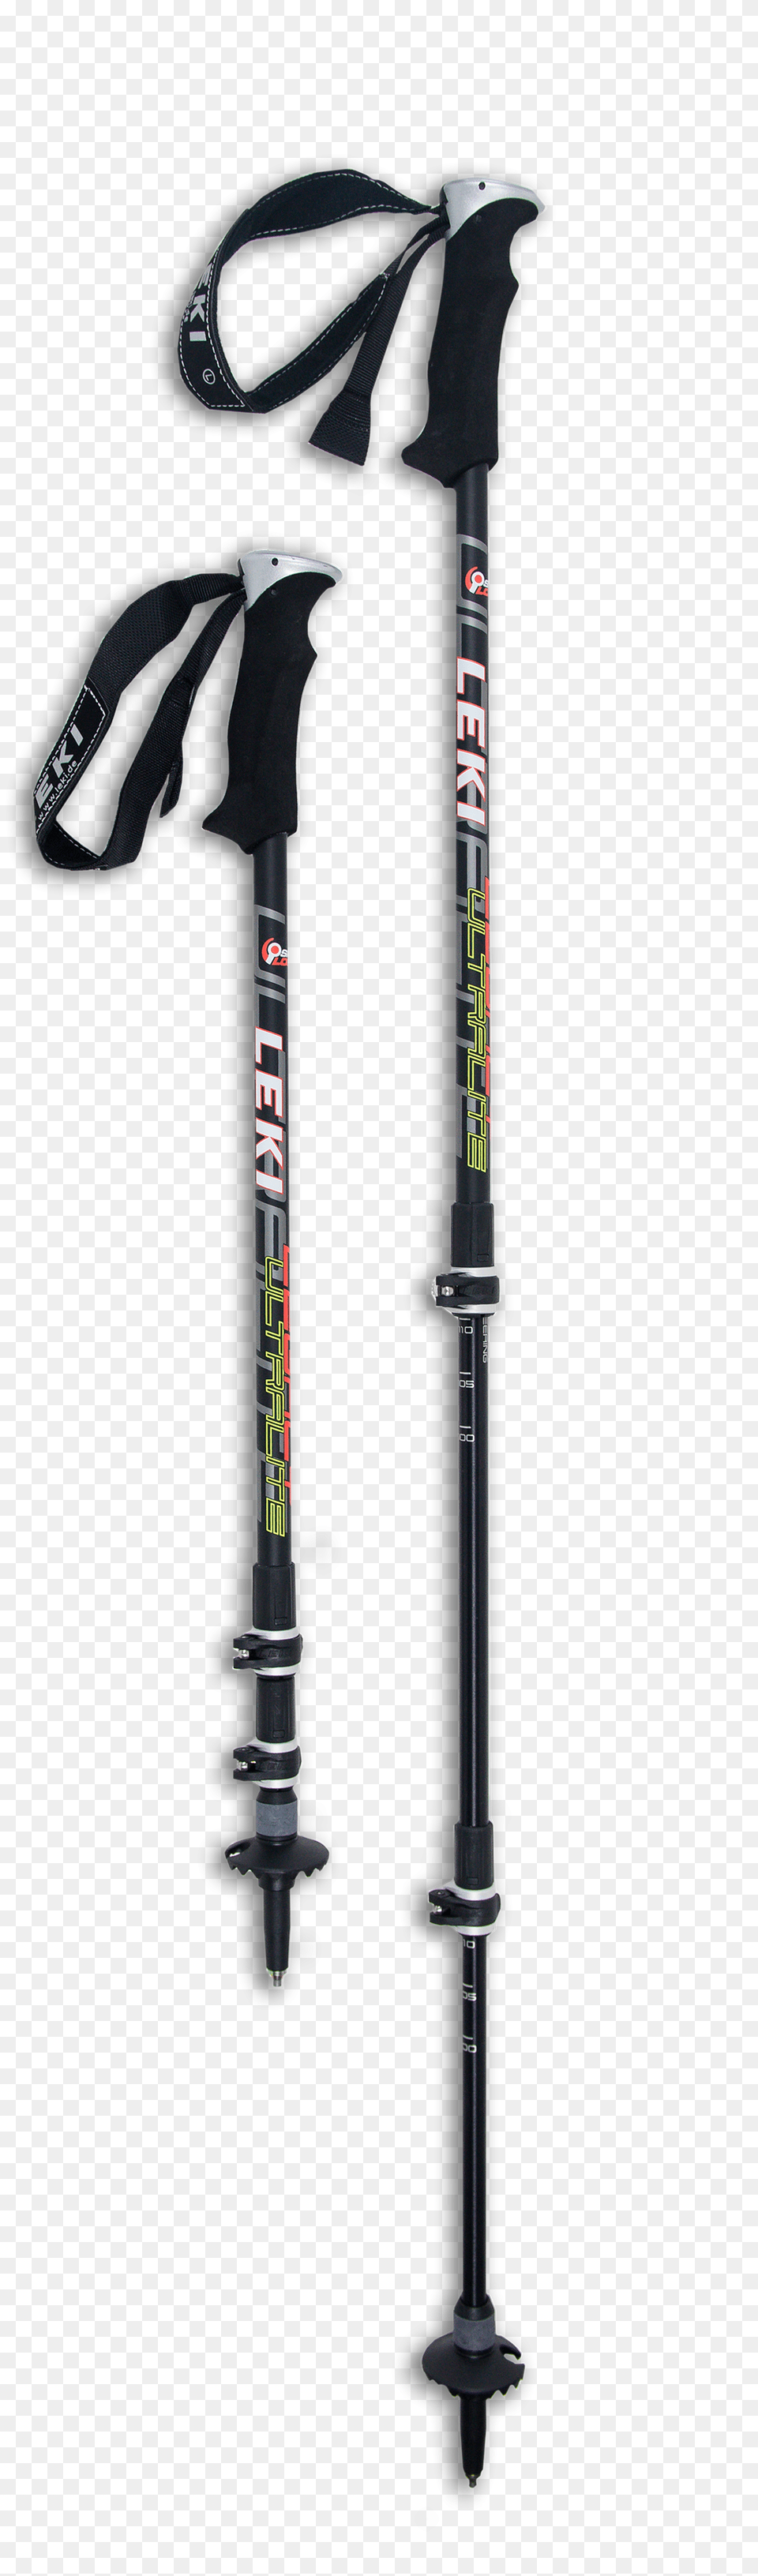 Trekking Pole, Stick, Cane, Bow, Weapon Png Image